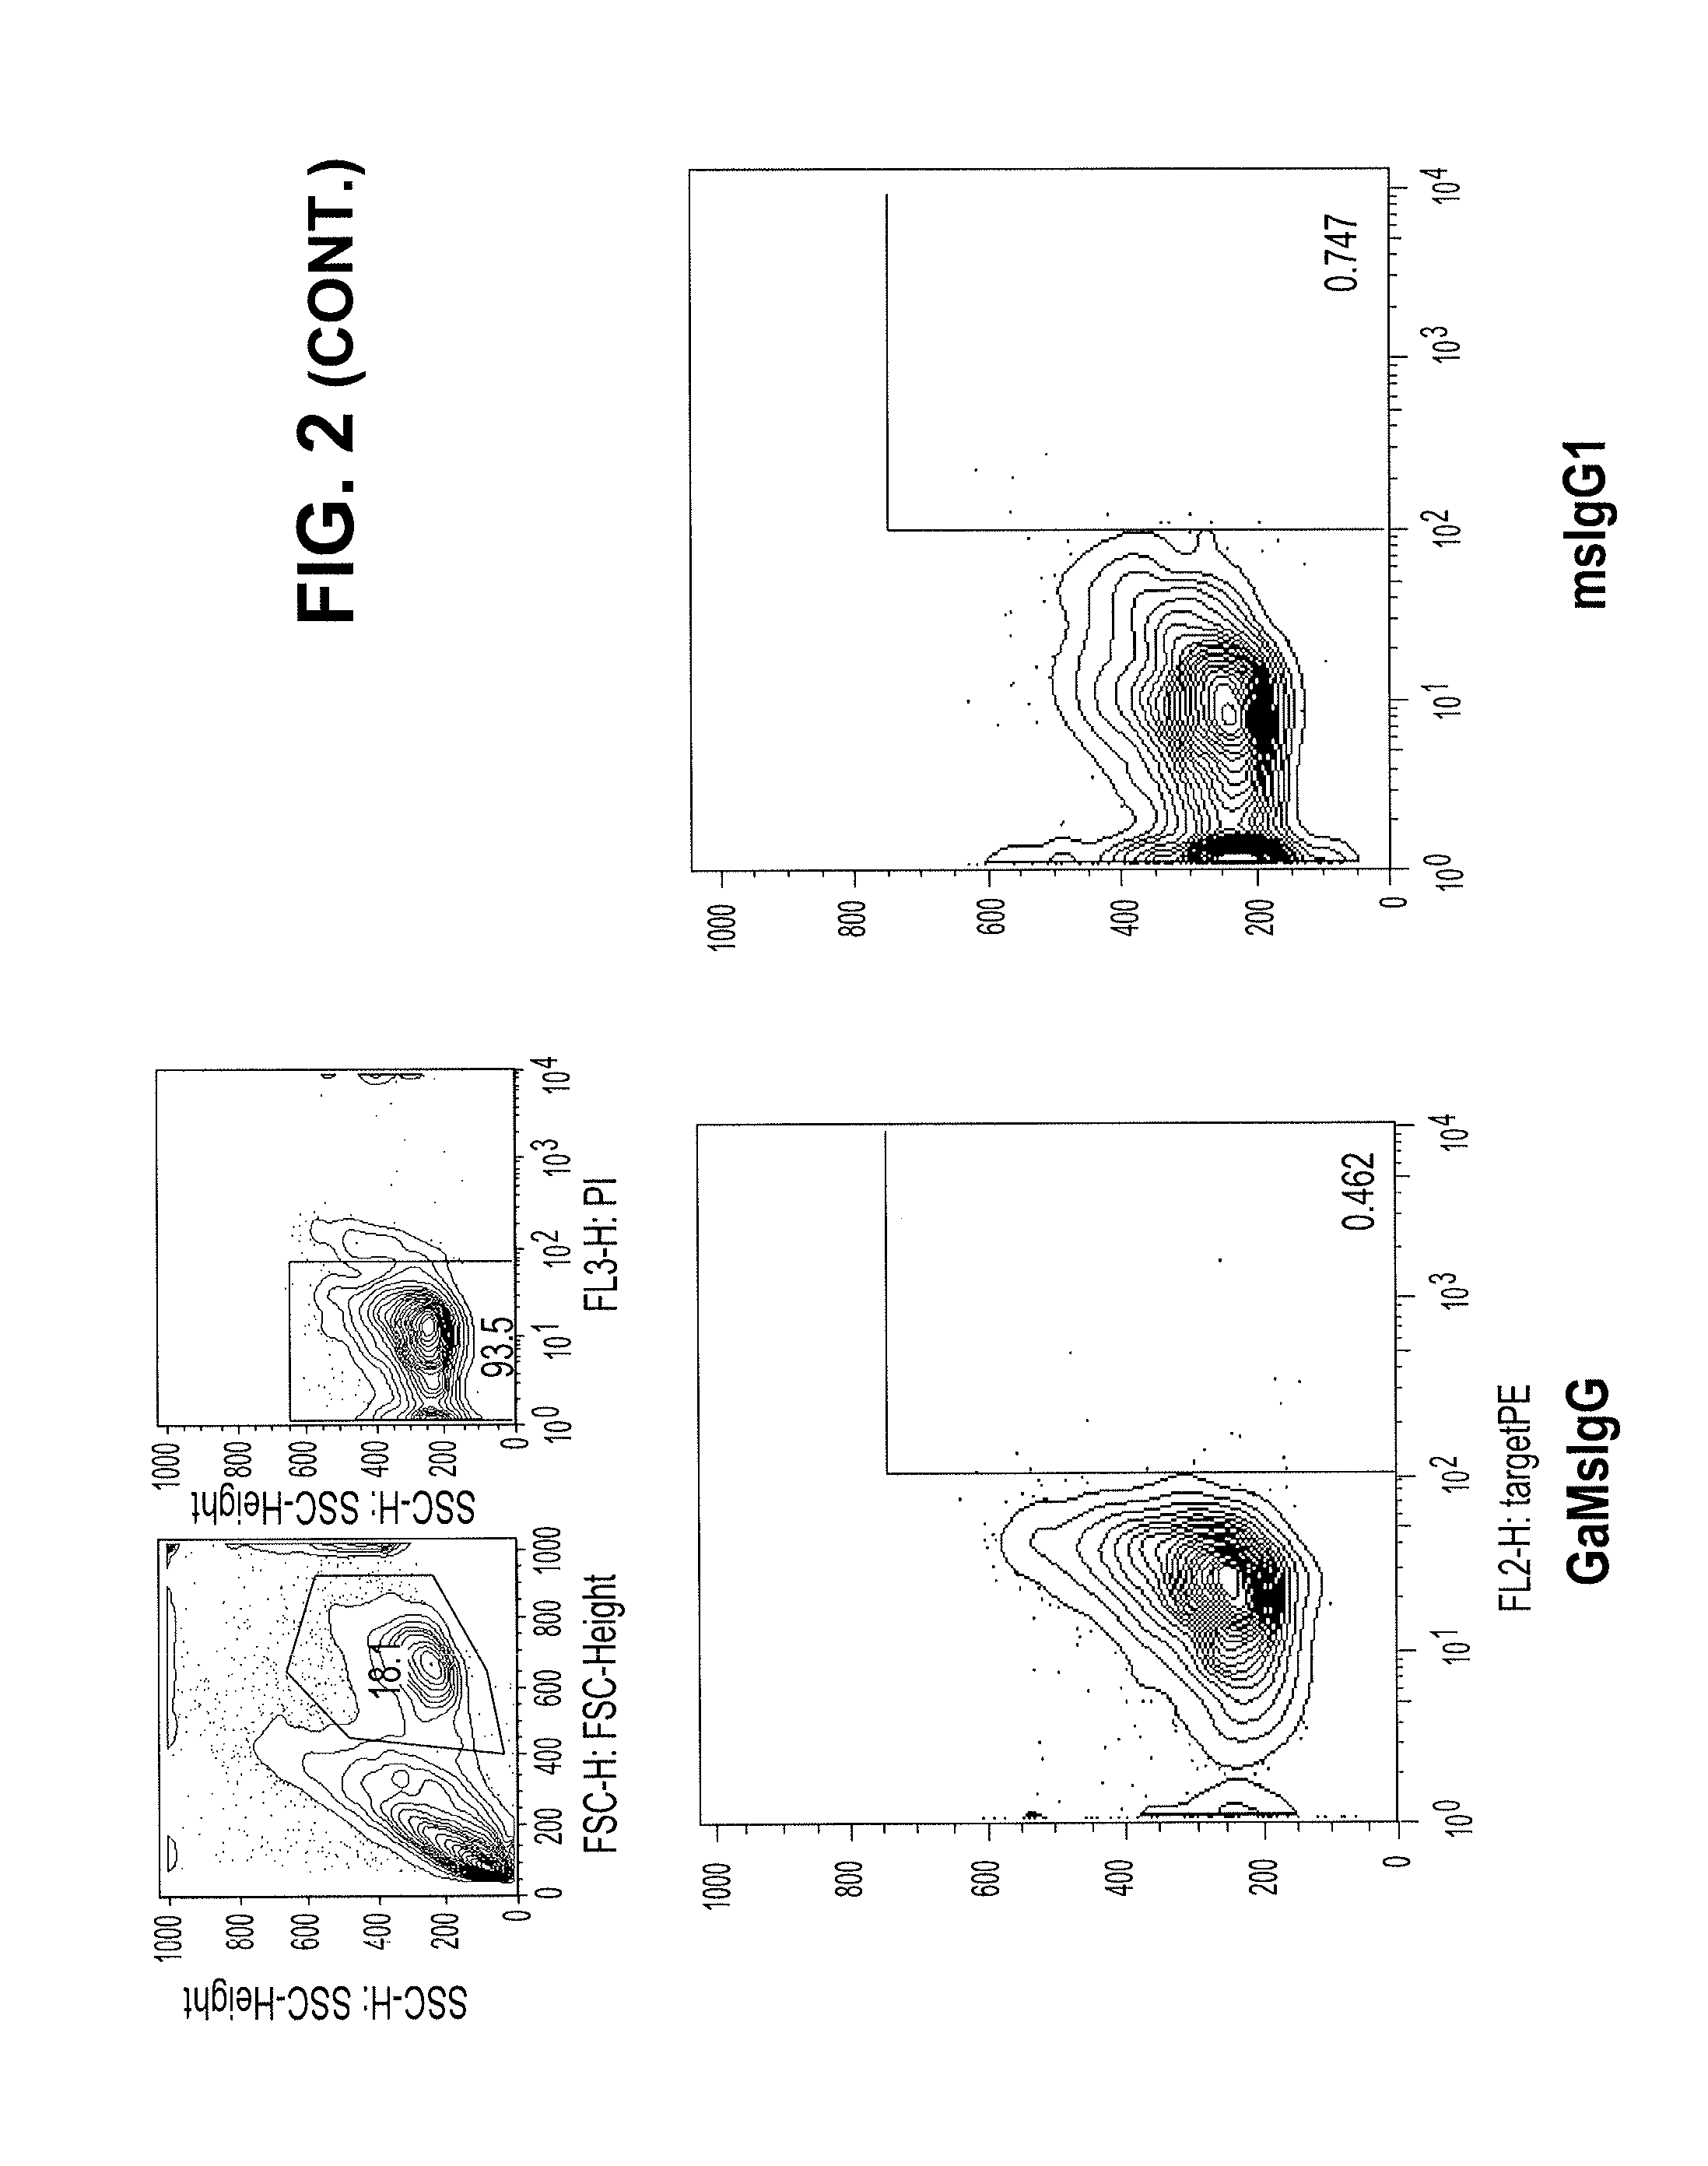 Antibodies that specifically bind to TIM3